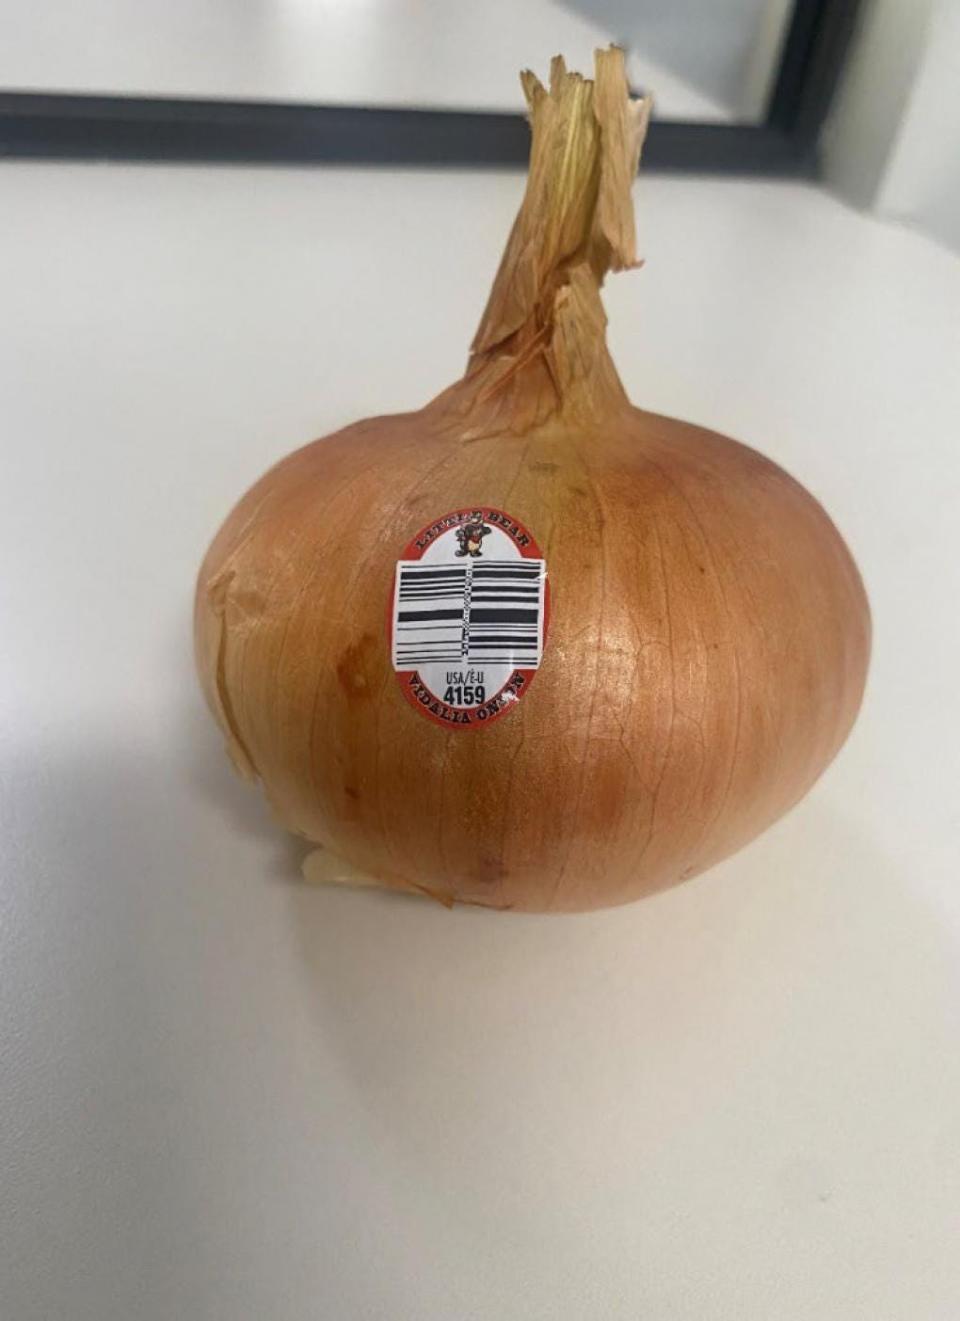 This FDA picture shows the label on the Vidalia onions recalled last week by A&M Farms after deliveries to Publix and Wegman's grocery stores.